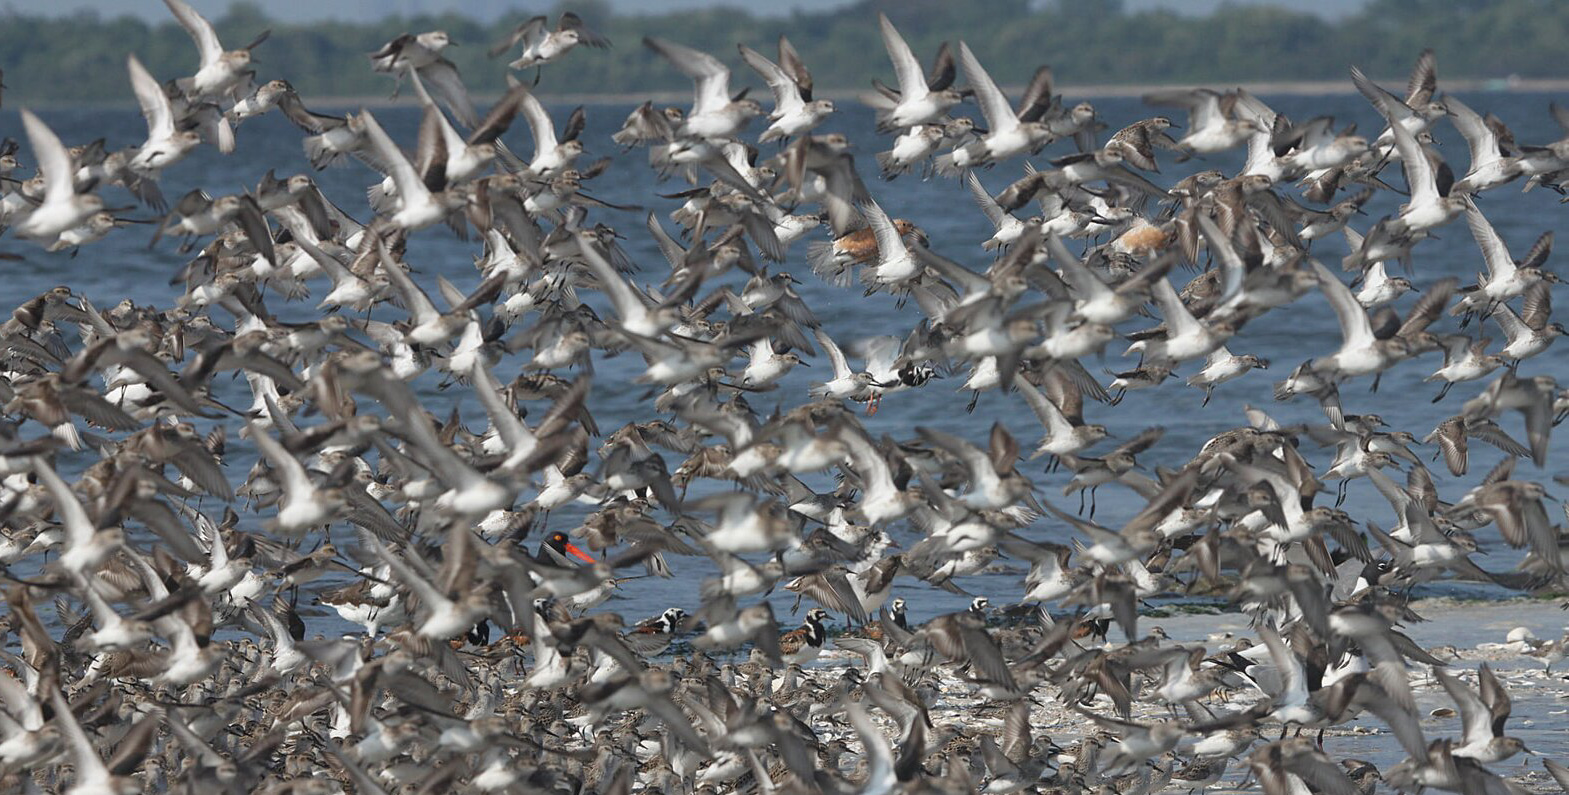 Shorebirds visit Jamaica Bay in great numbers in both spring and late summer. Here Red Knots, Semipalmated Sandpipers, Ruddy Turnstones, and American Oystercatchers feed amongst spawning Horseshoe Crabs. Photo: <a href=\"https://www.facebook.com/don.riepe.14\" target=\"_blank\">Don Riepe</a>